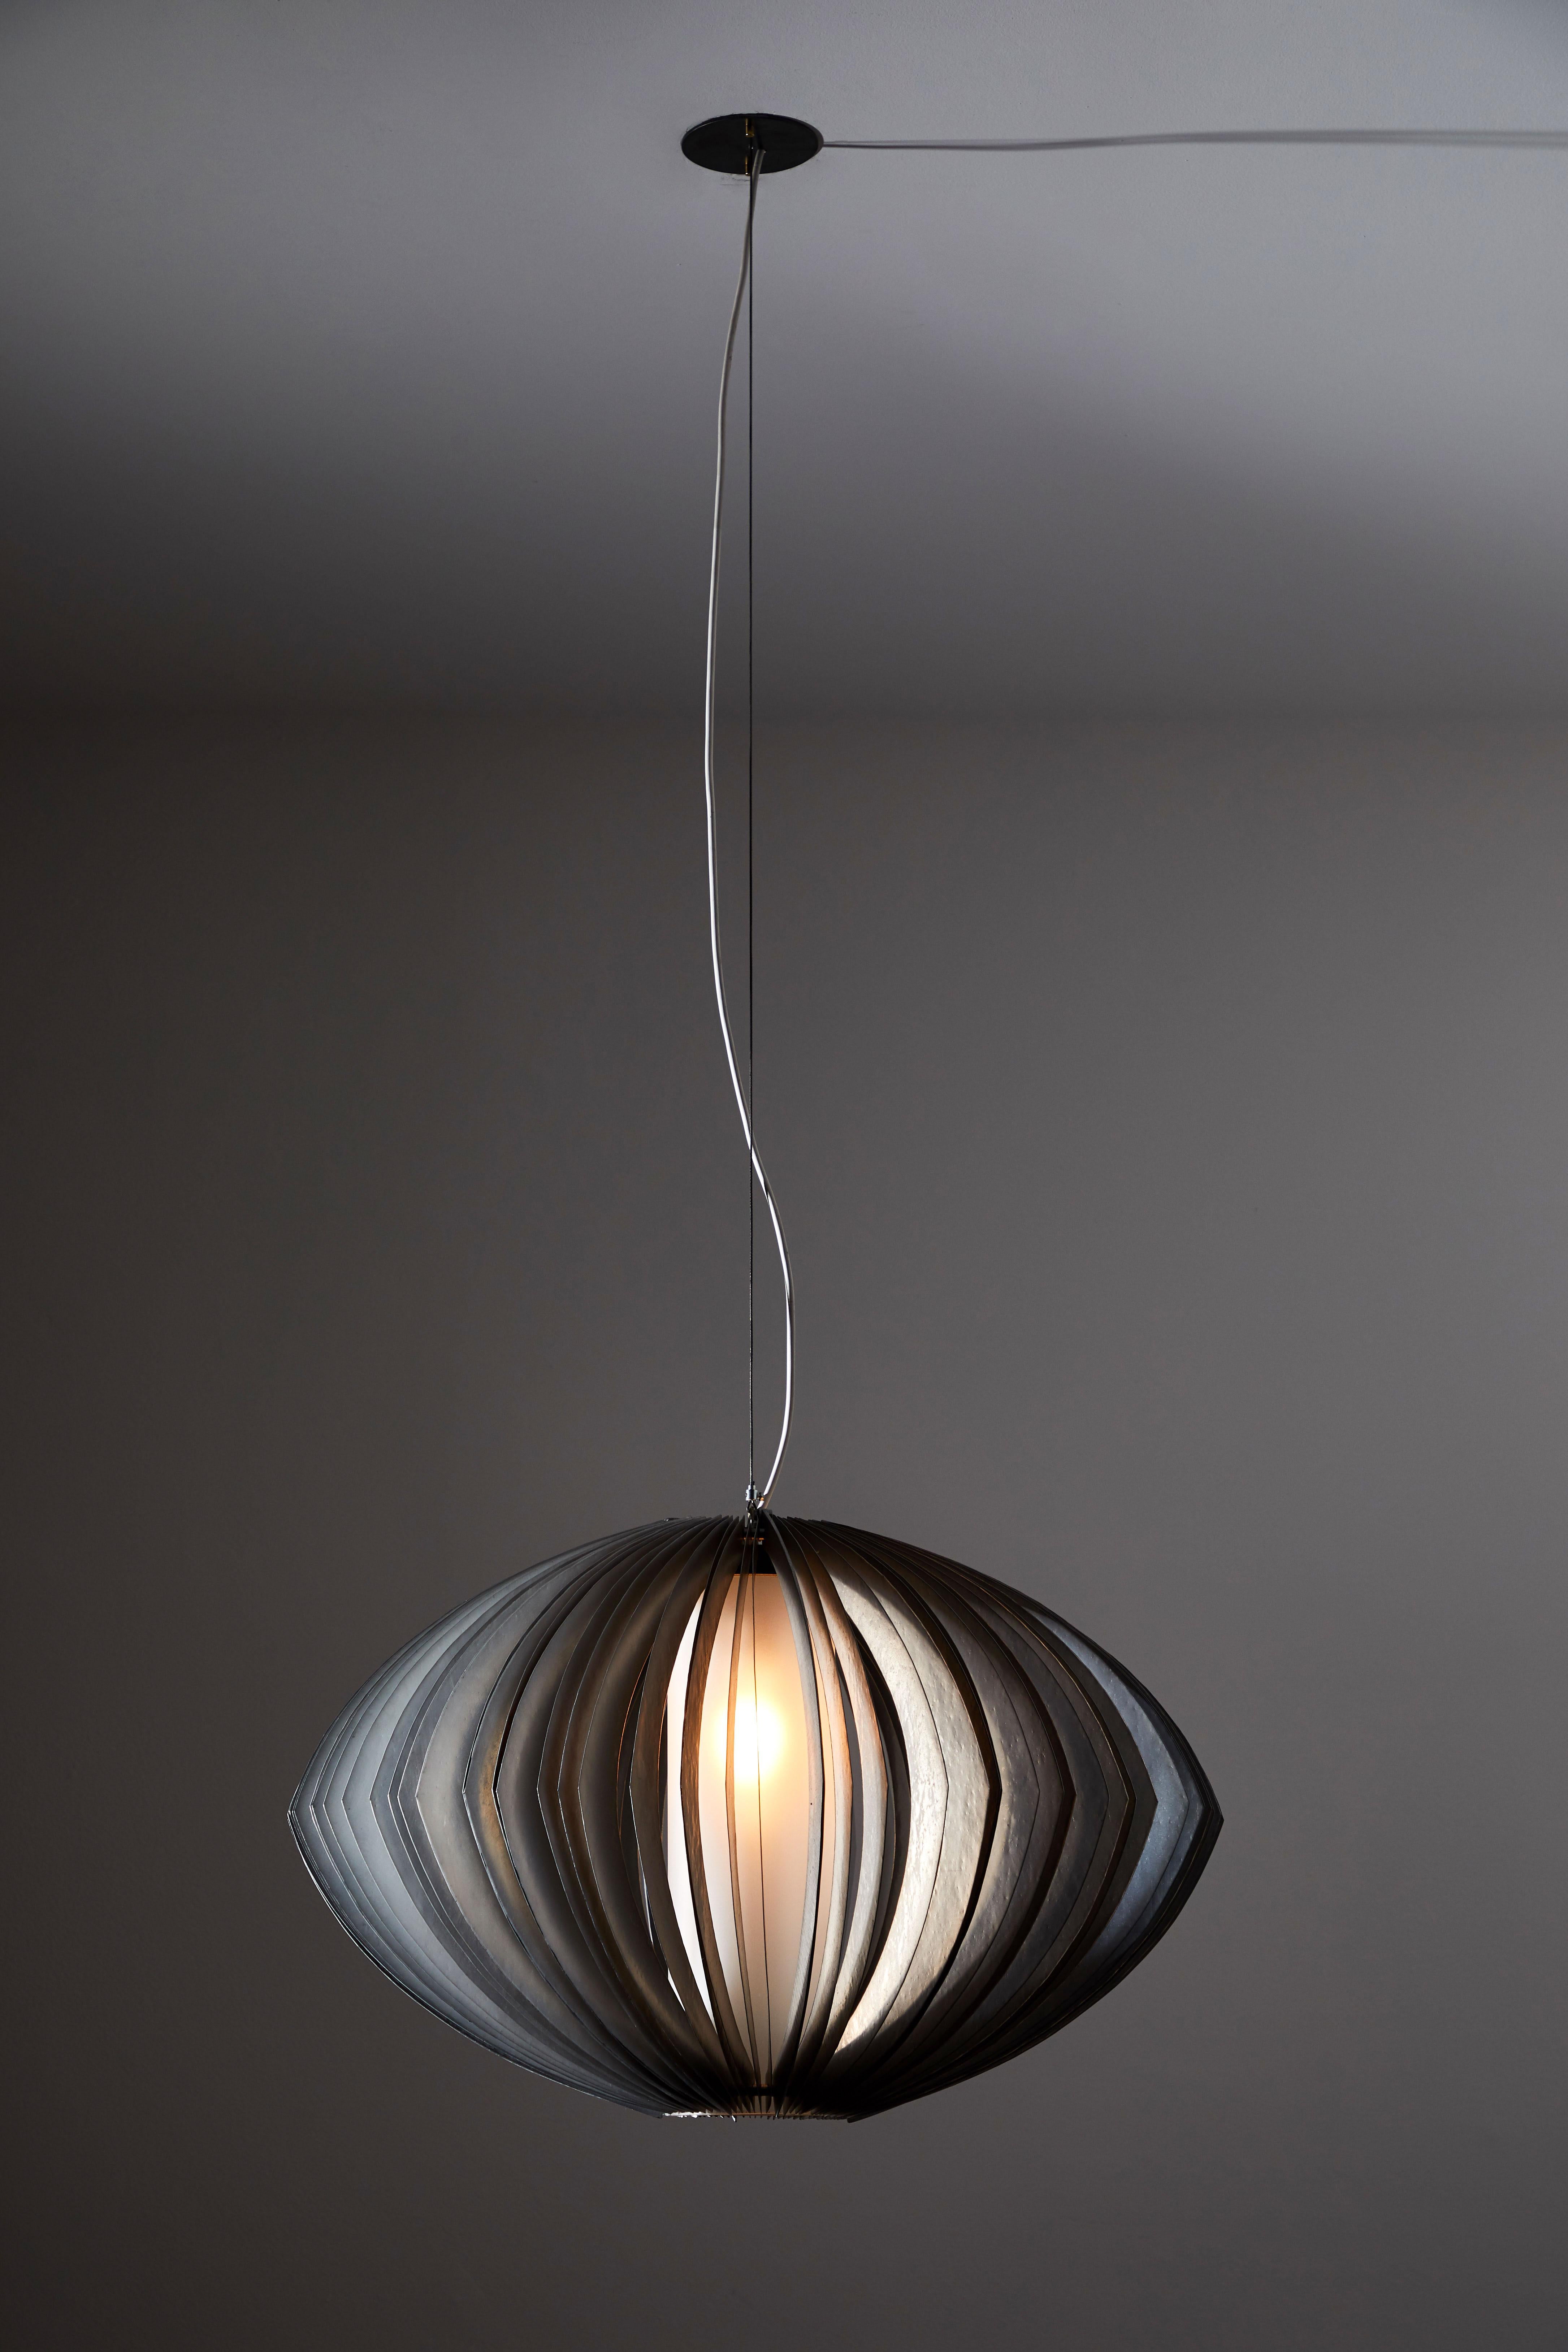 Suspension light by Paolo Rizzato. Designed and manufactured in Italy, circa 1970s. Metal, satin glass diffuser. Rewired for US junction boxes. Takes one E27 100w maximum bulb. Height displayed is for fixture only, overall drop can be adjusted.